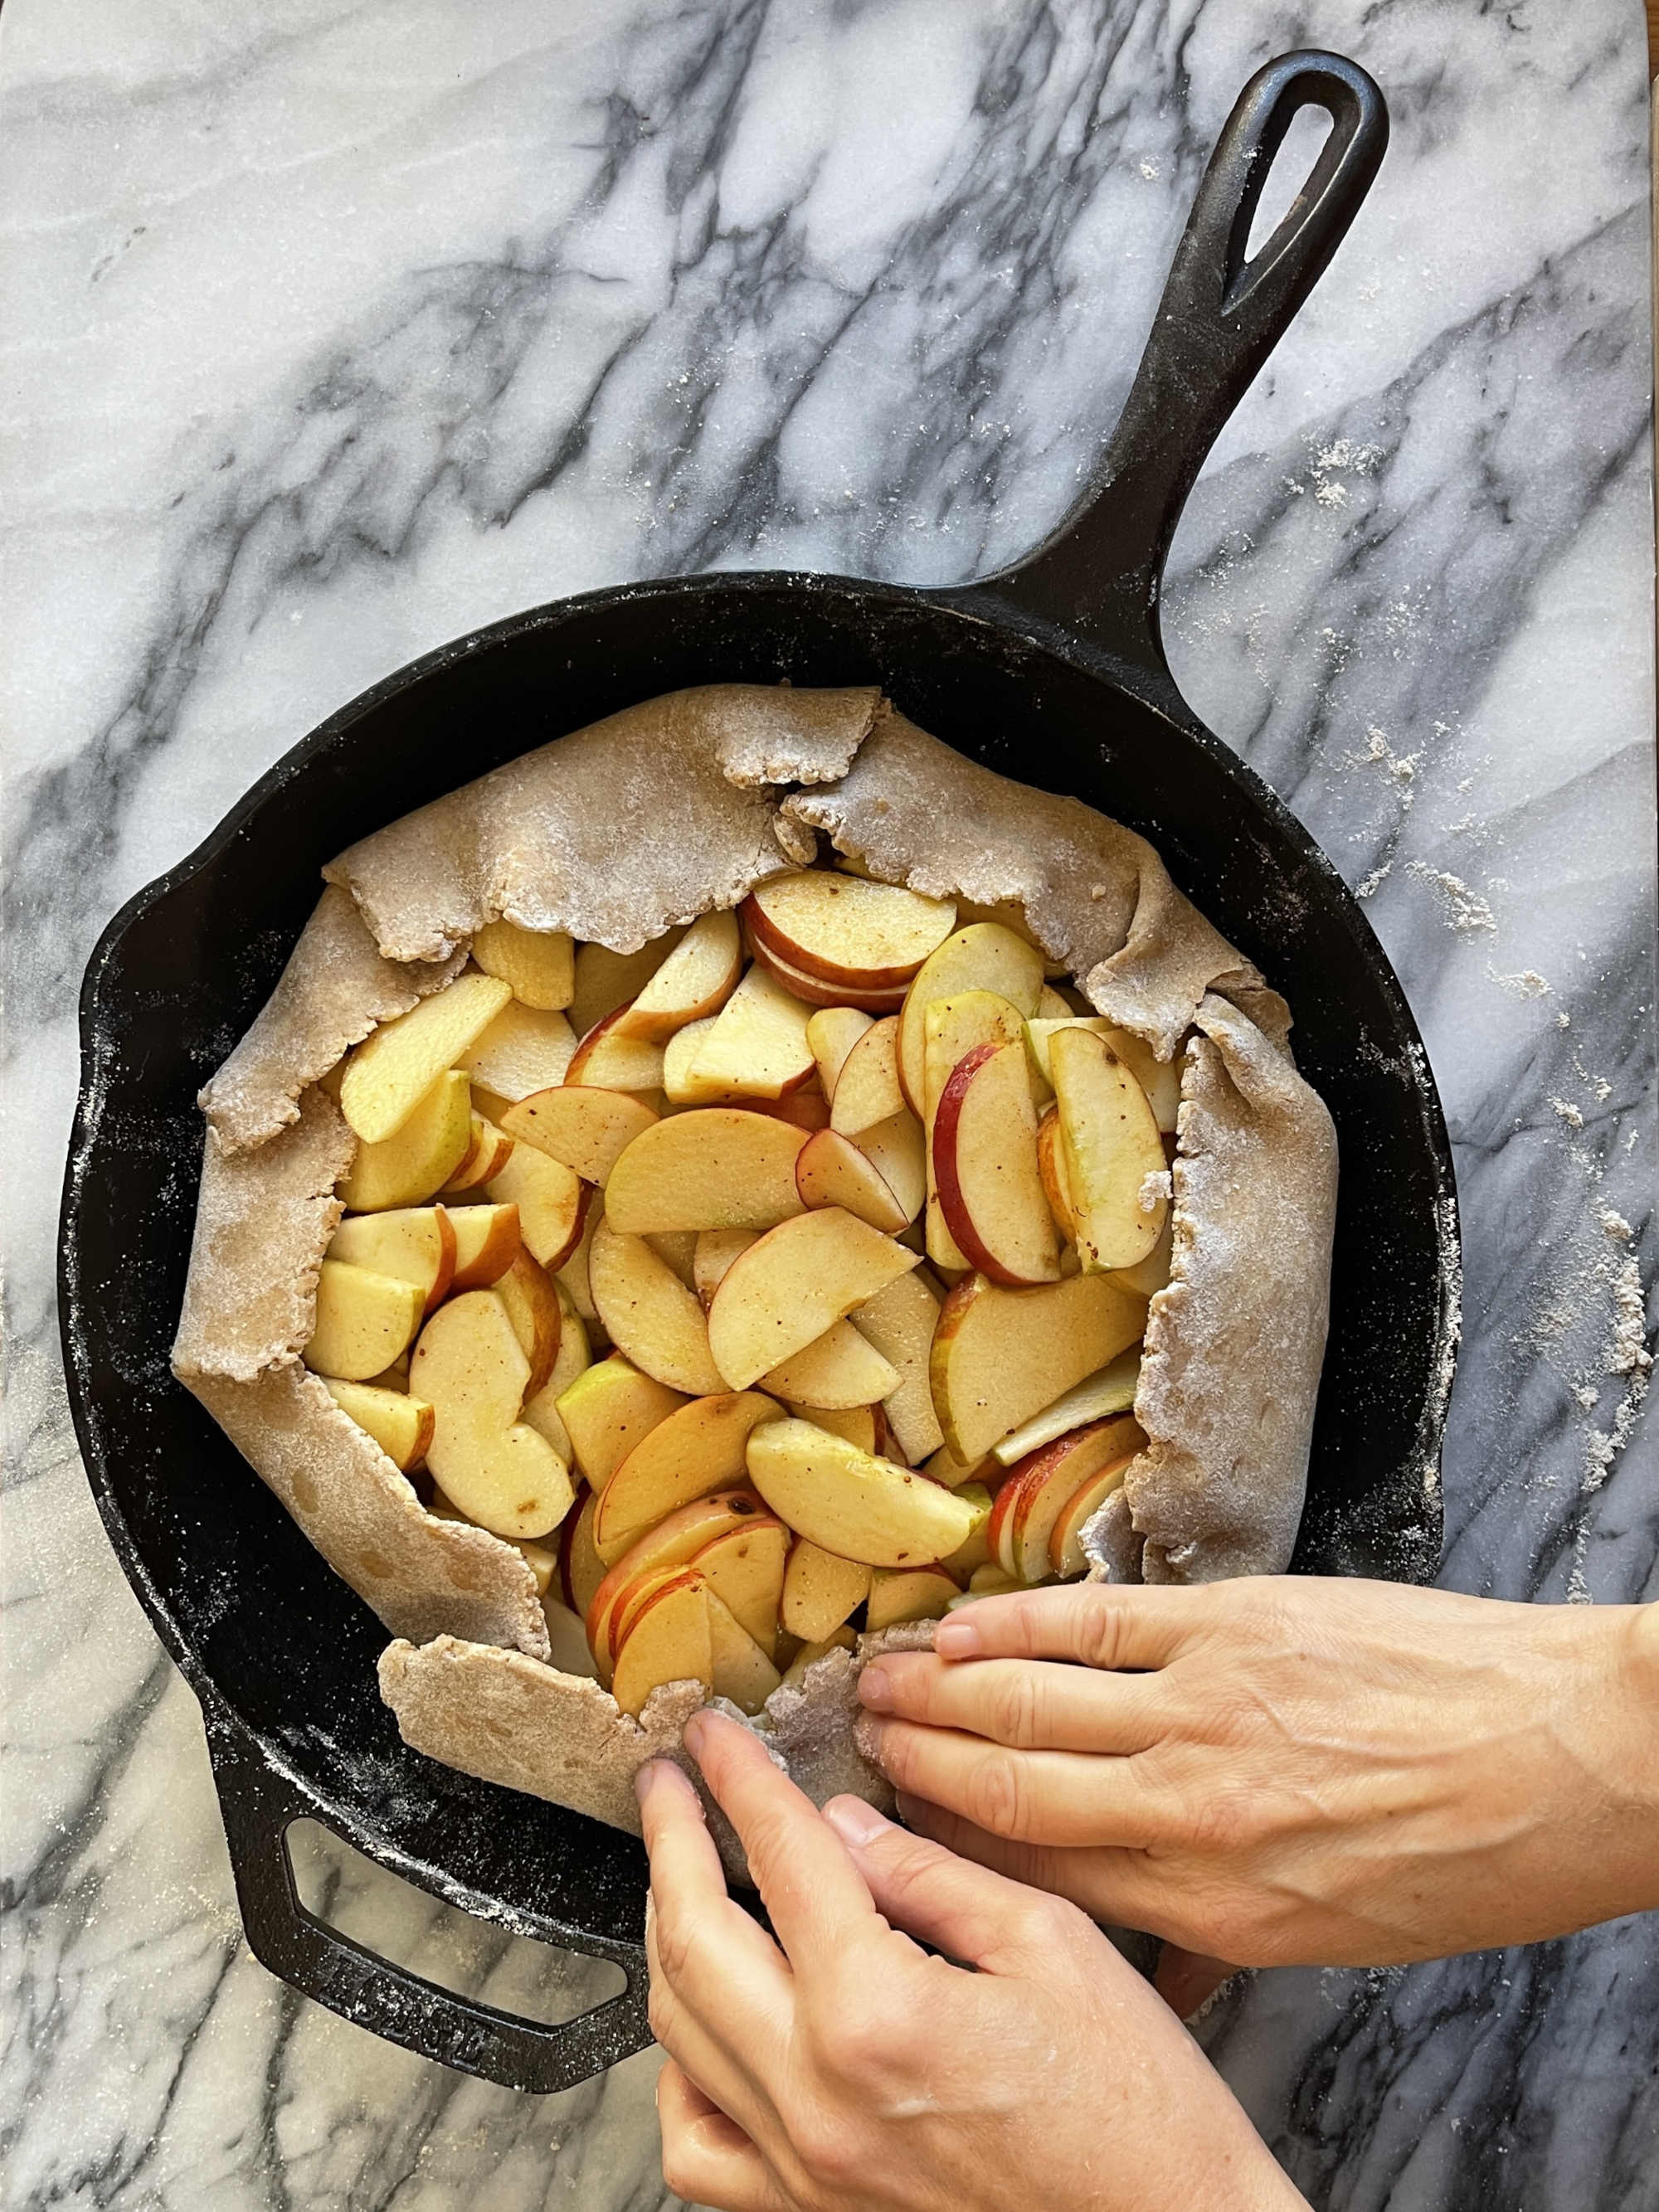 Hands fold over whole wheat dough filled with apple slices to form a galette. The galette is in a cast iron pan. The pan is sitting on grey and white marble.